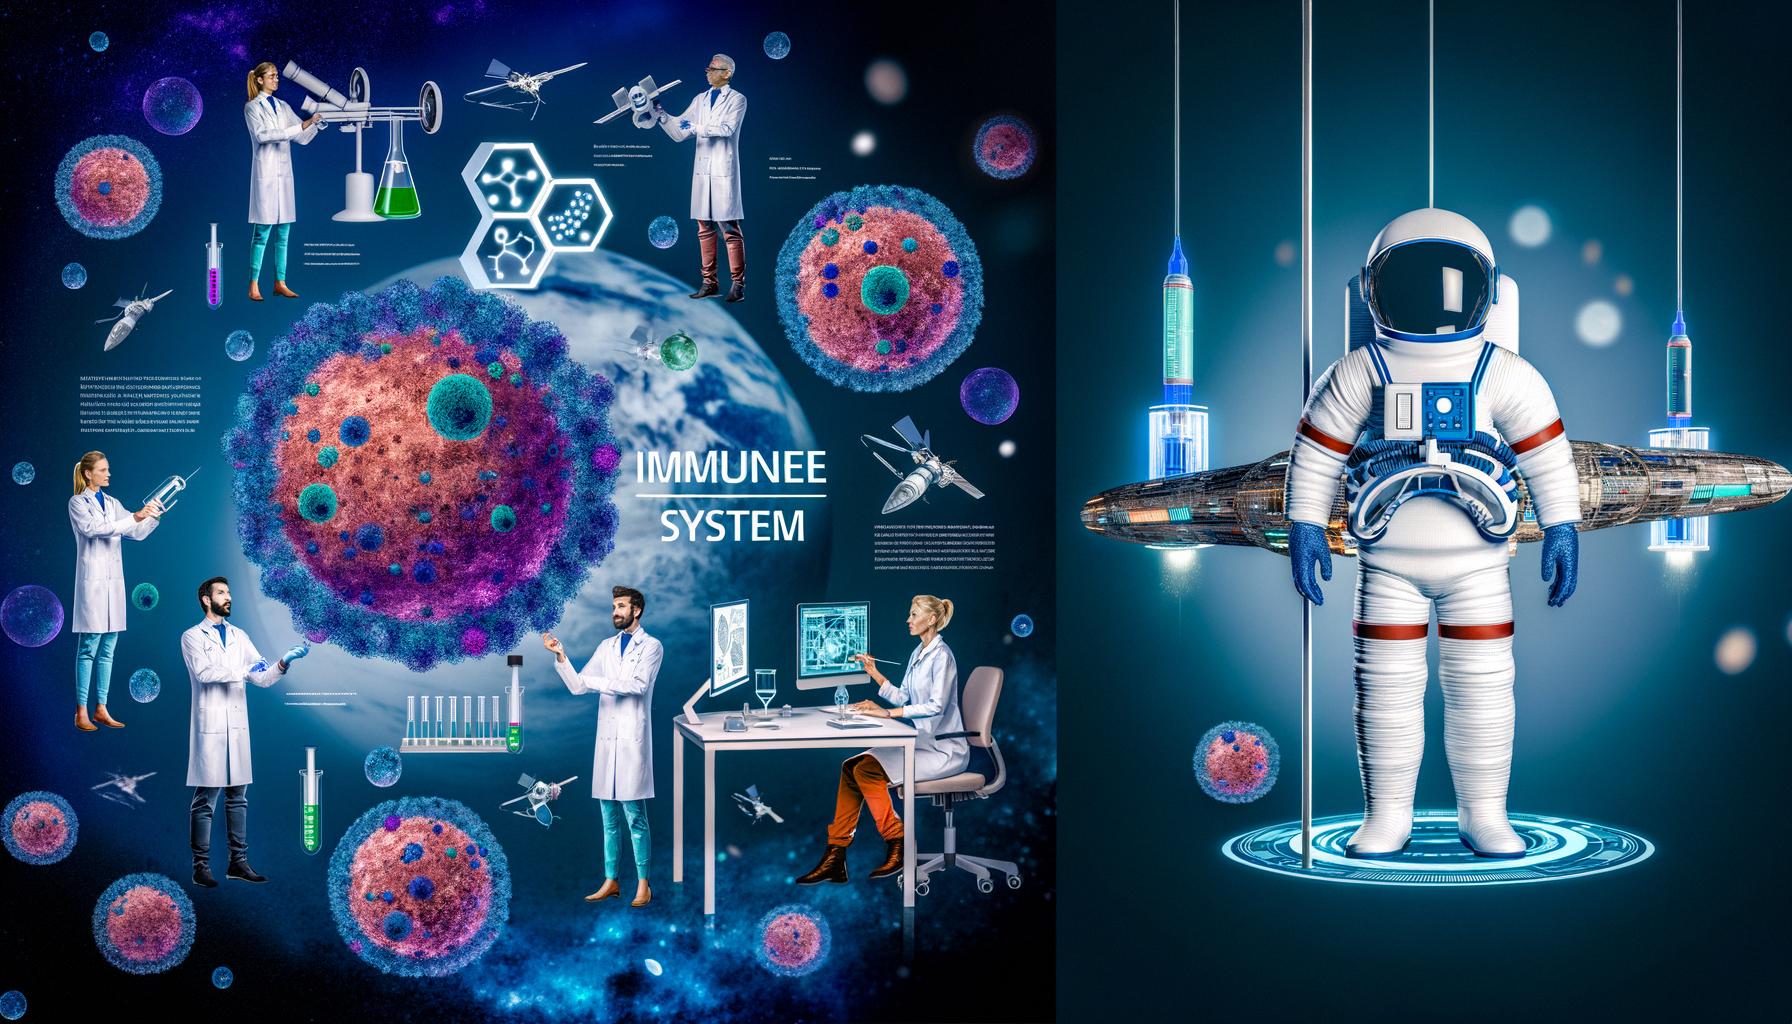 Immune system innovations for space and Earth